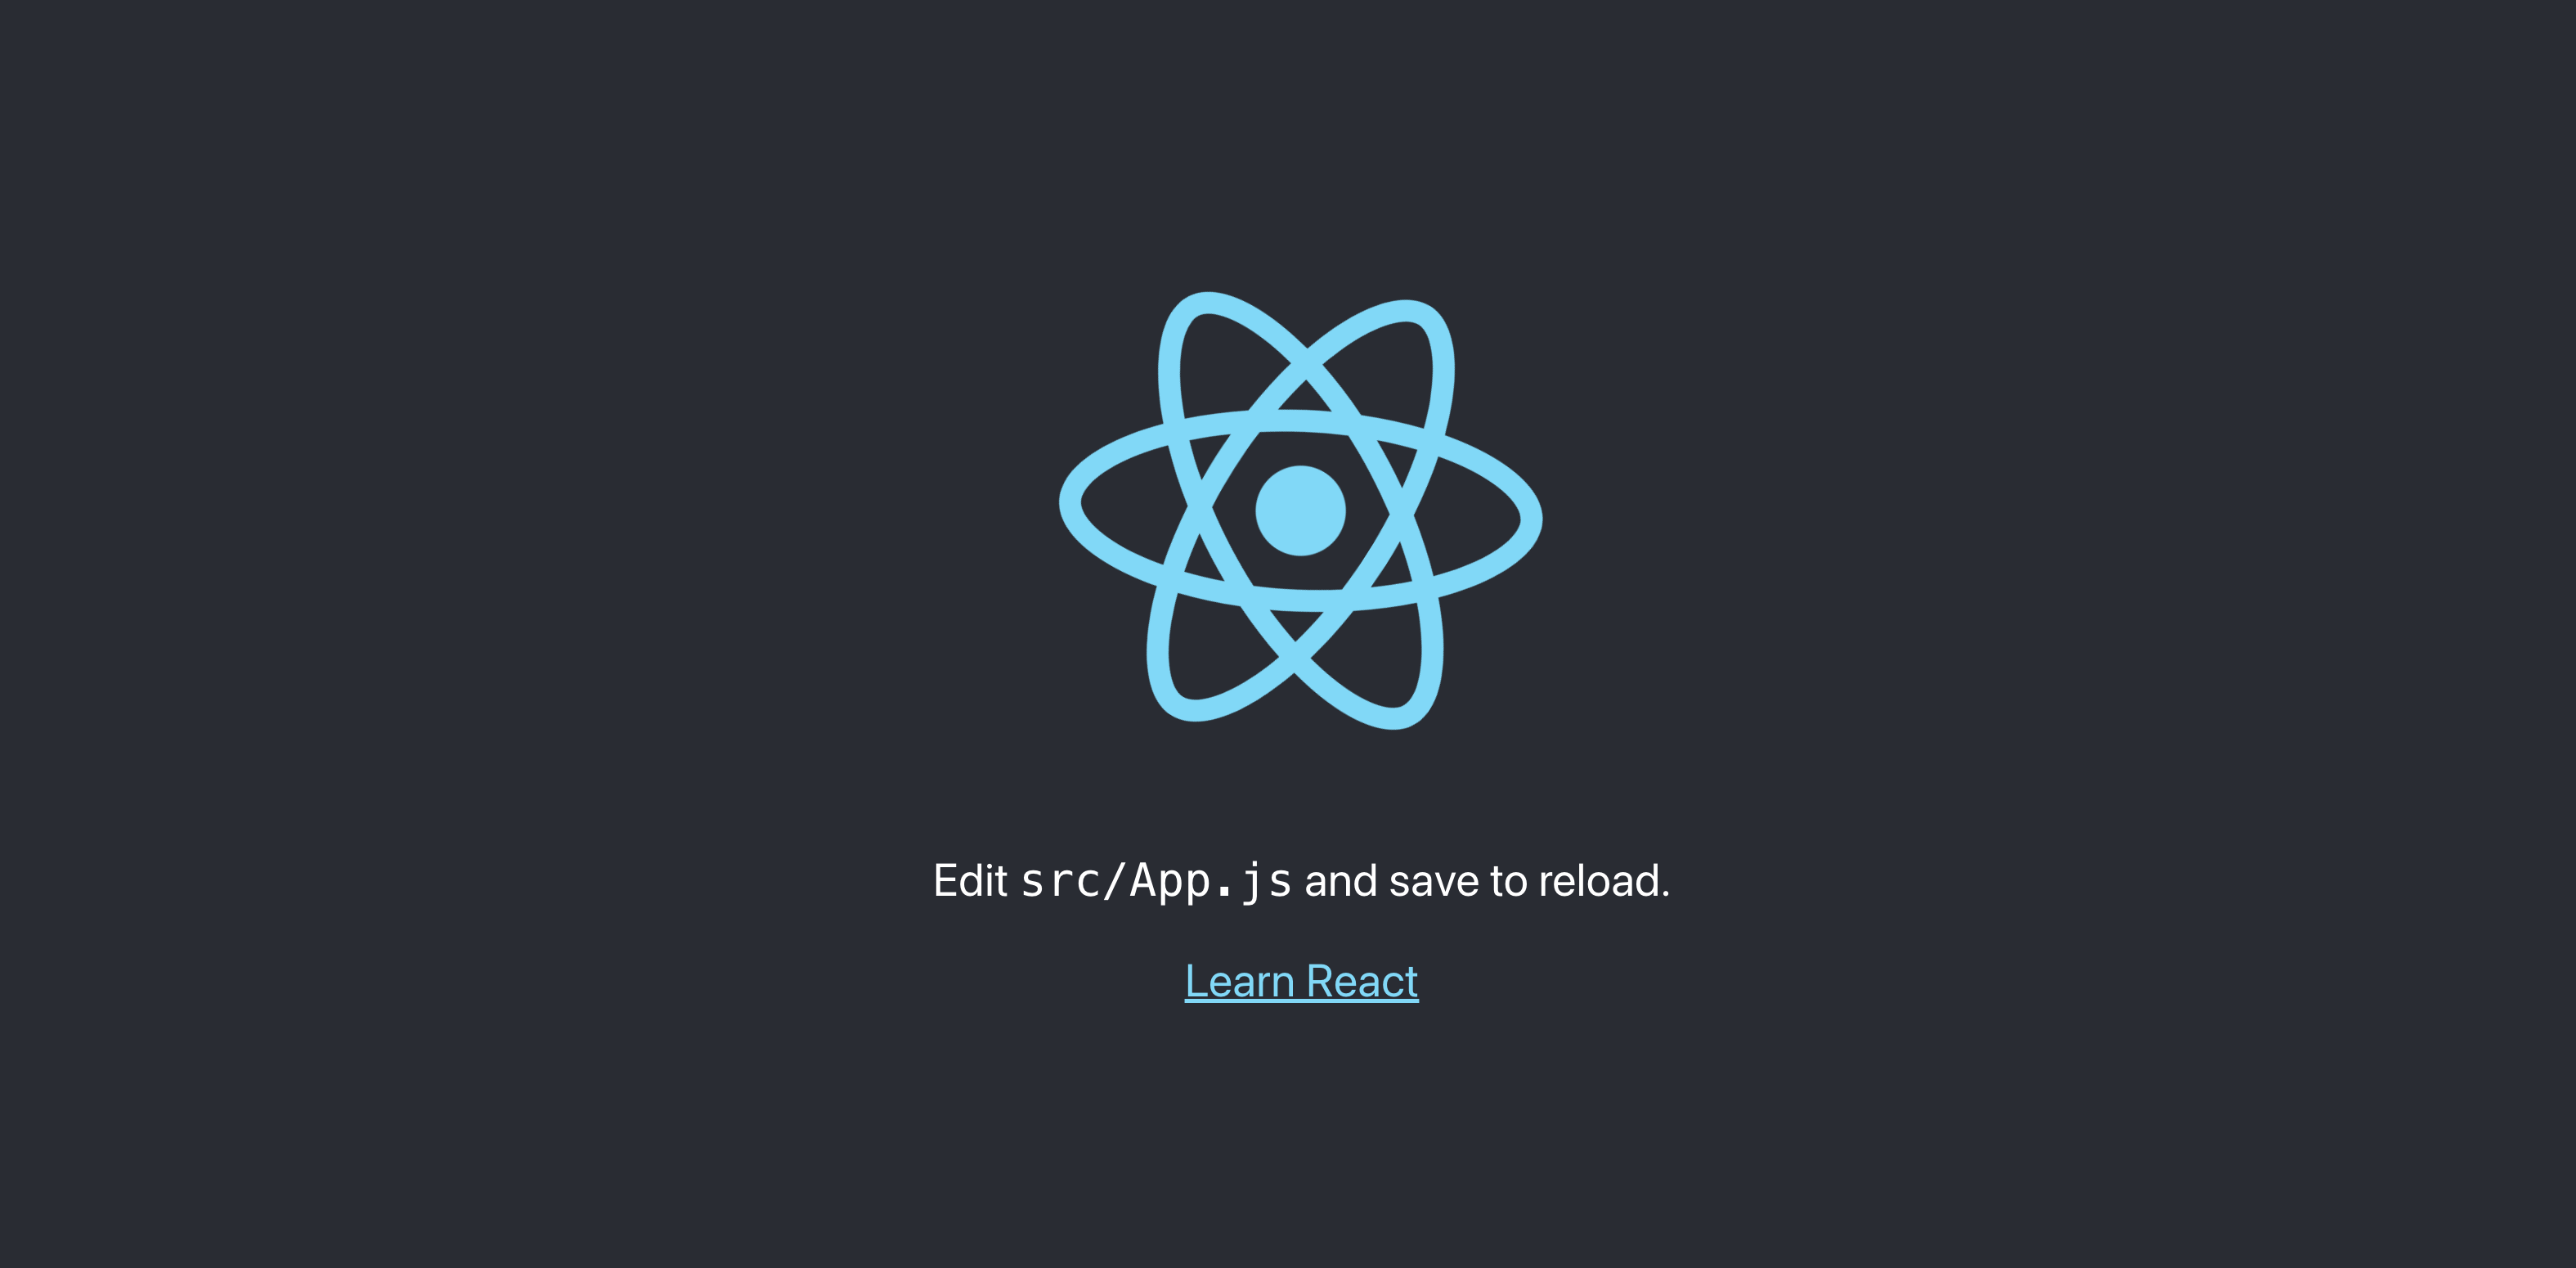 Default React page